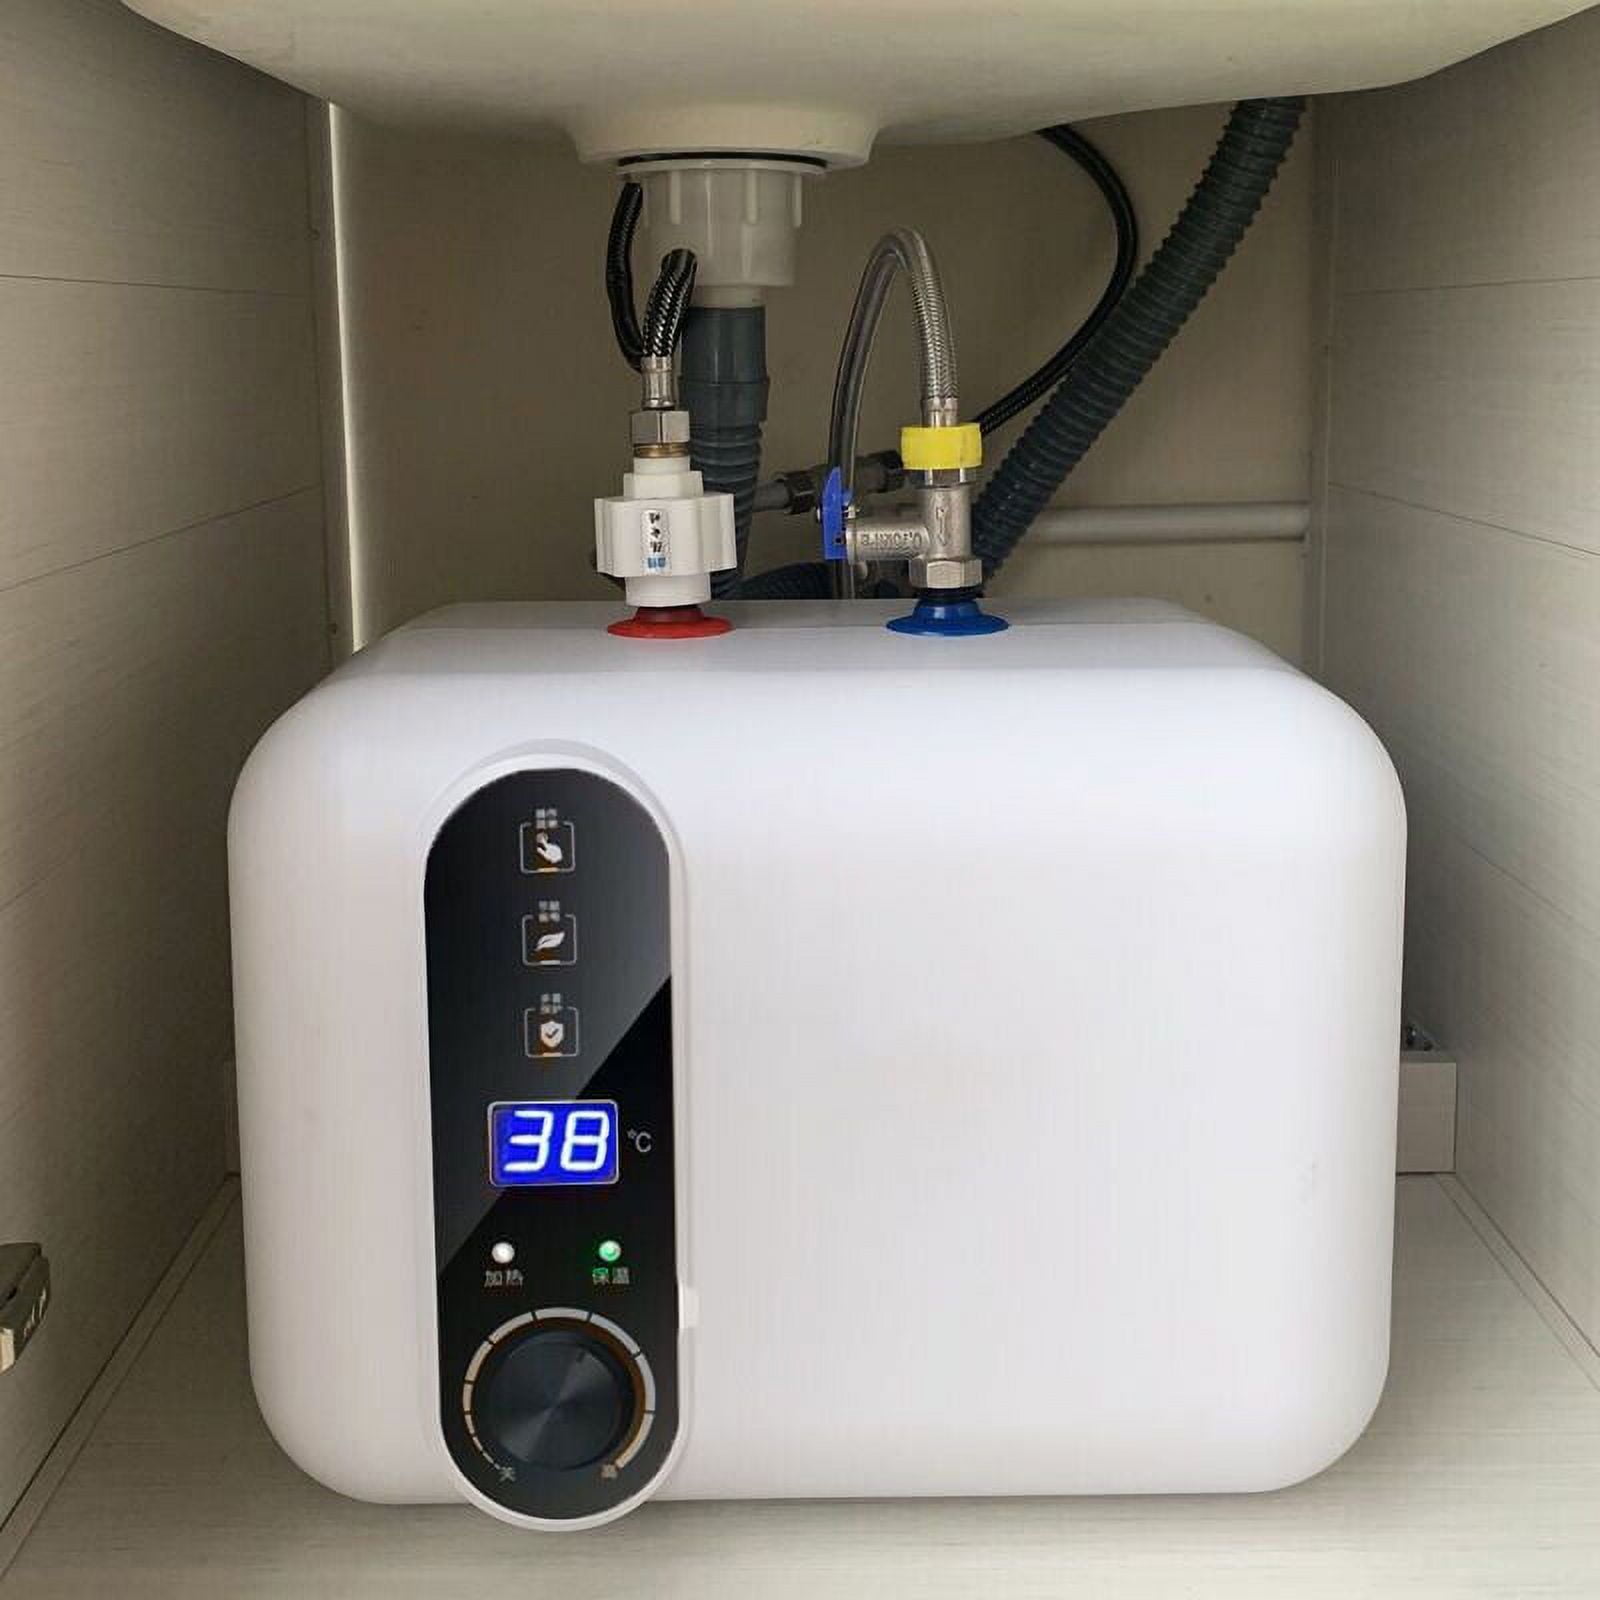 Instant Electric Hot Water Heater Shower Compact Mini-Tank Storage RV 10L  110V 10L Electric Hot Water Heater 110V Compact Mini-Tank Storage,Rv Small